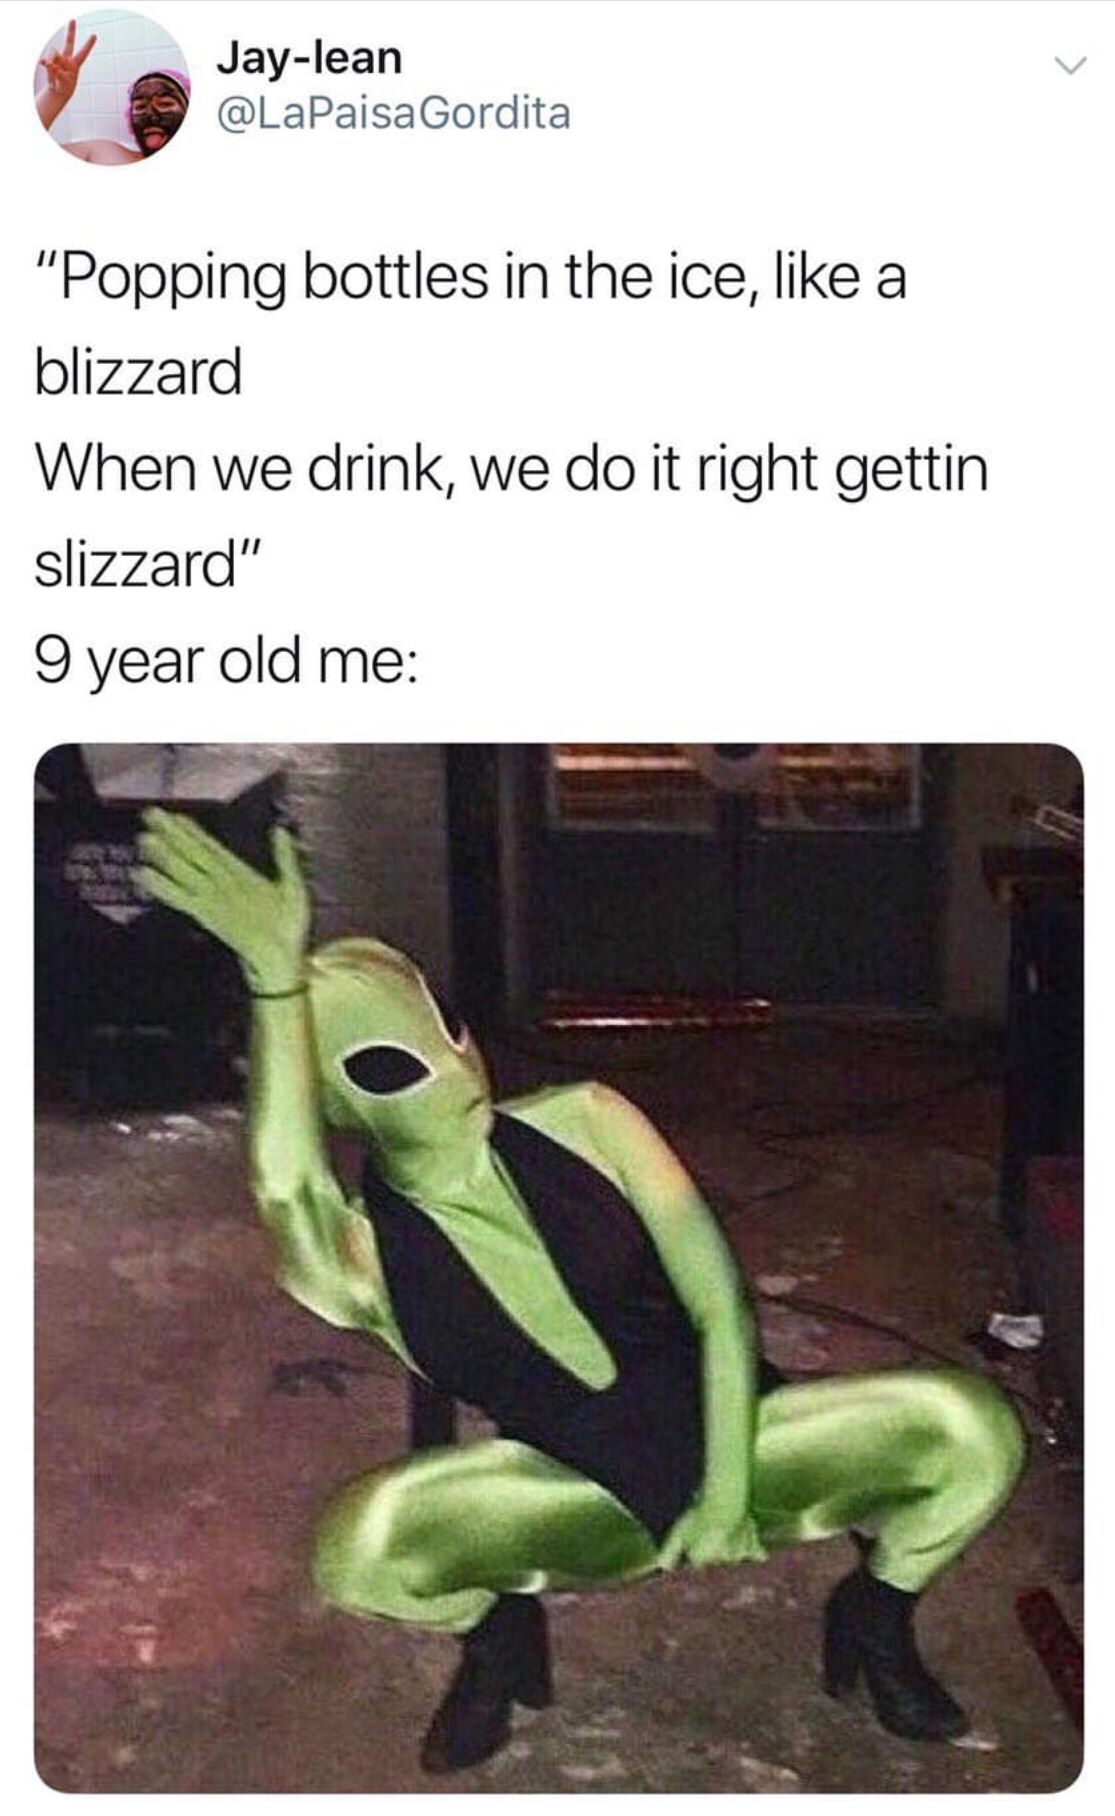 funny meme of popping bottles in the ice - Jaylean Gordita "Popping bottles in the ice, a blizzard When we drink, we do it right gettin slizzard" 9 year old me